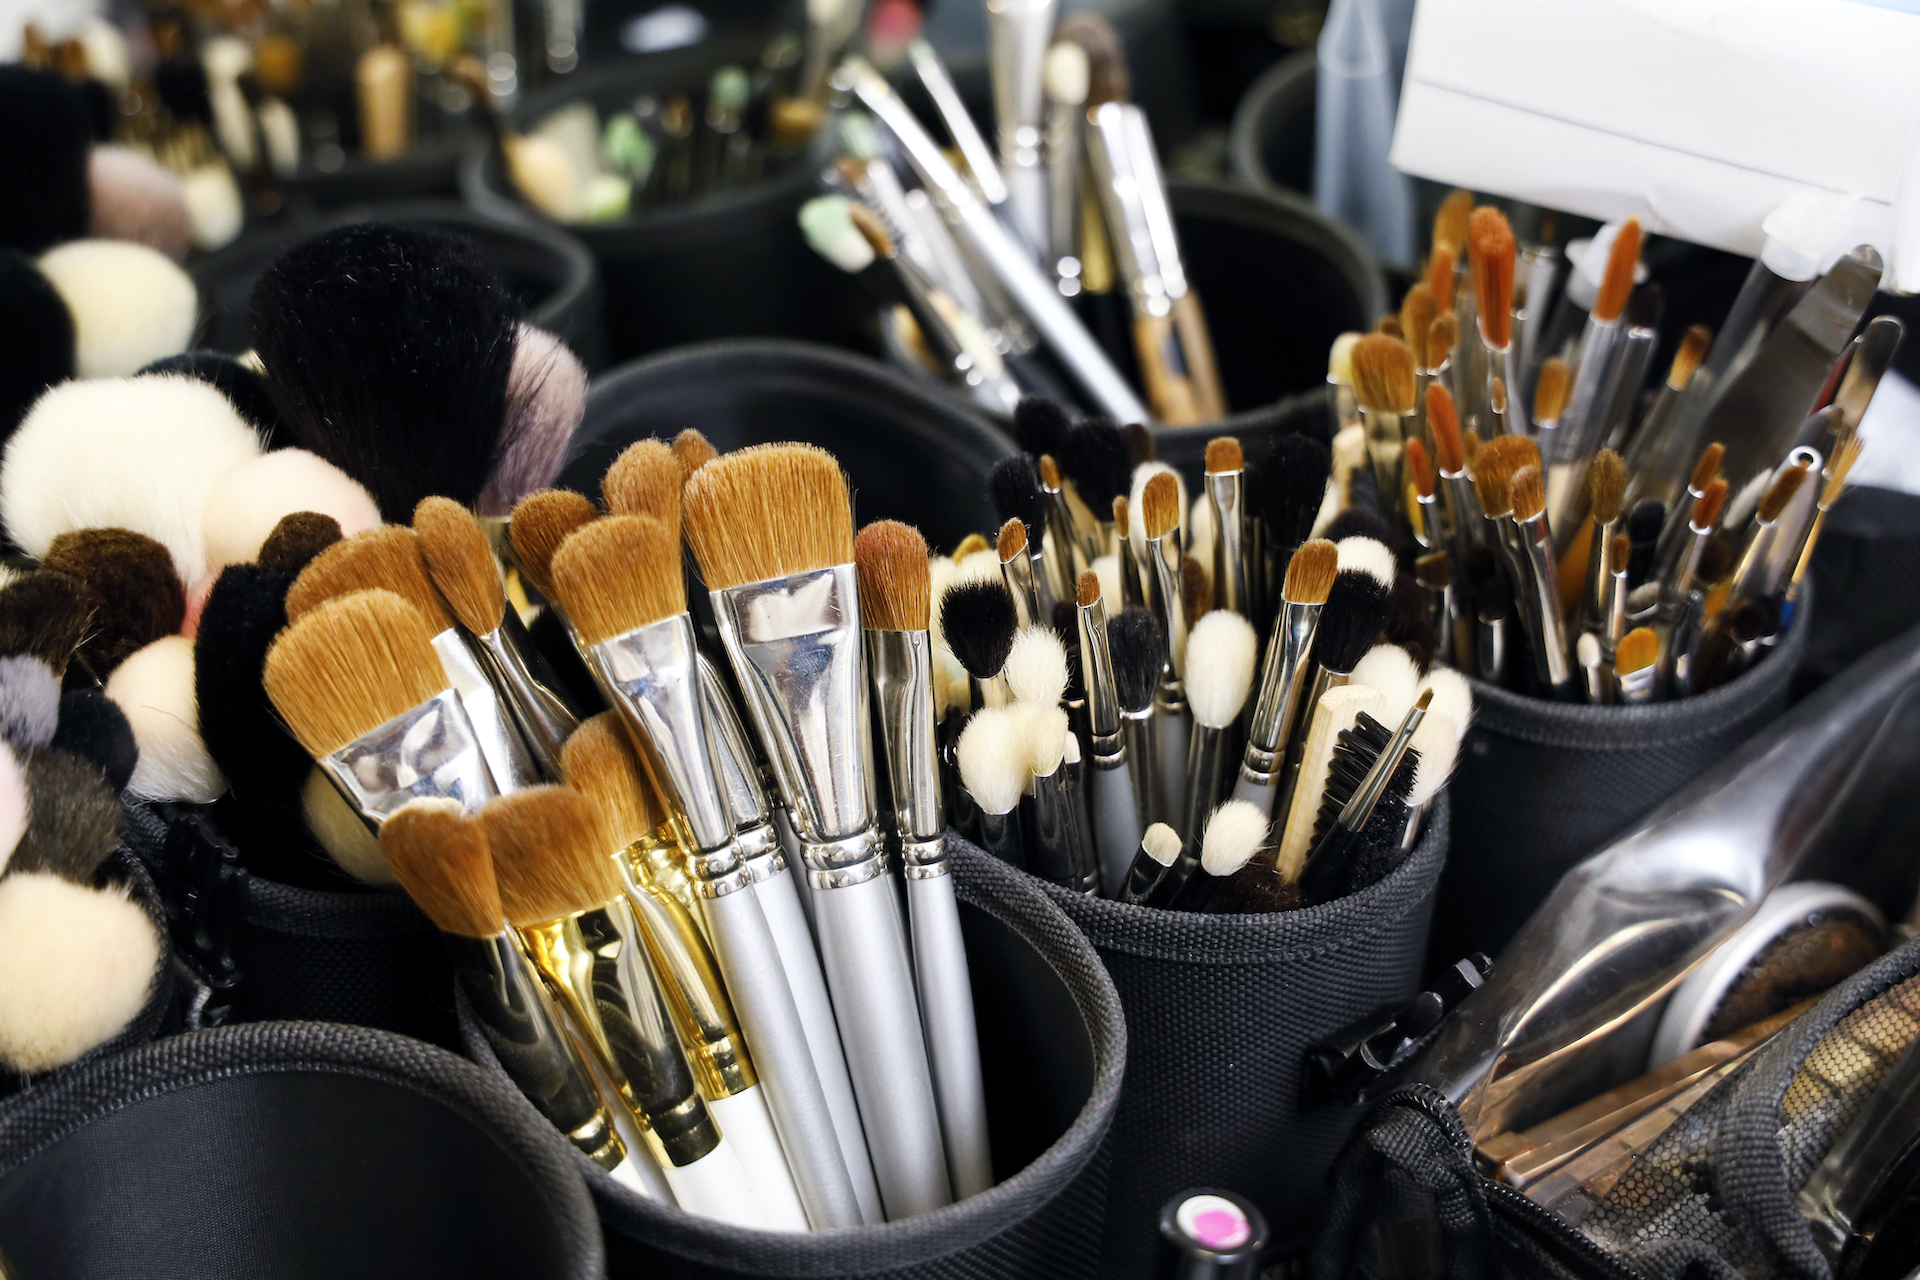 How To Clean Makeup Brushes Like A Pro